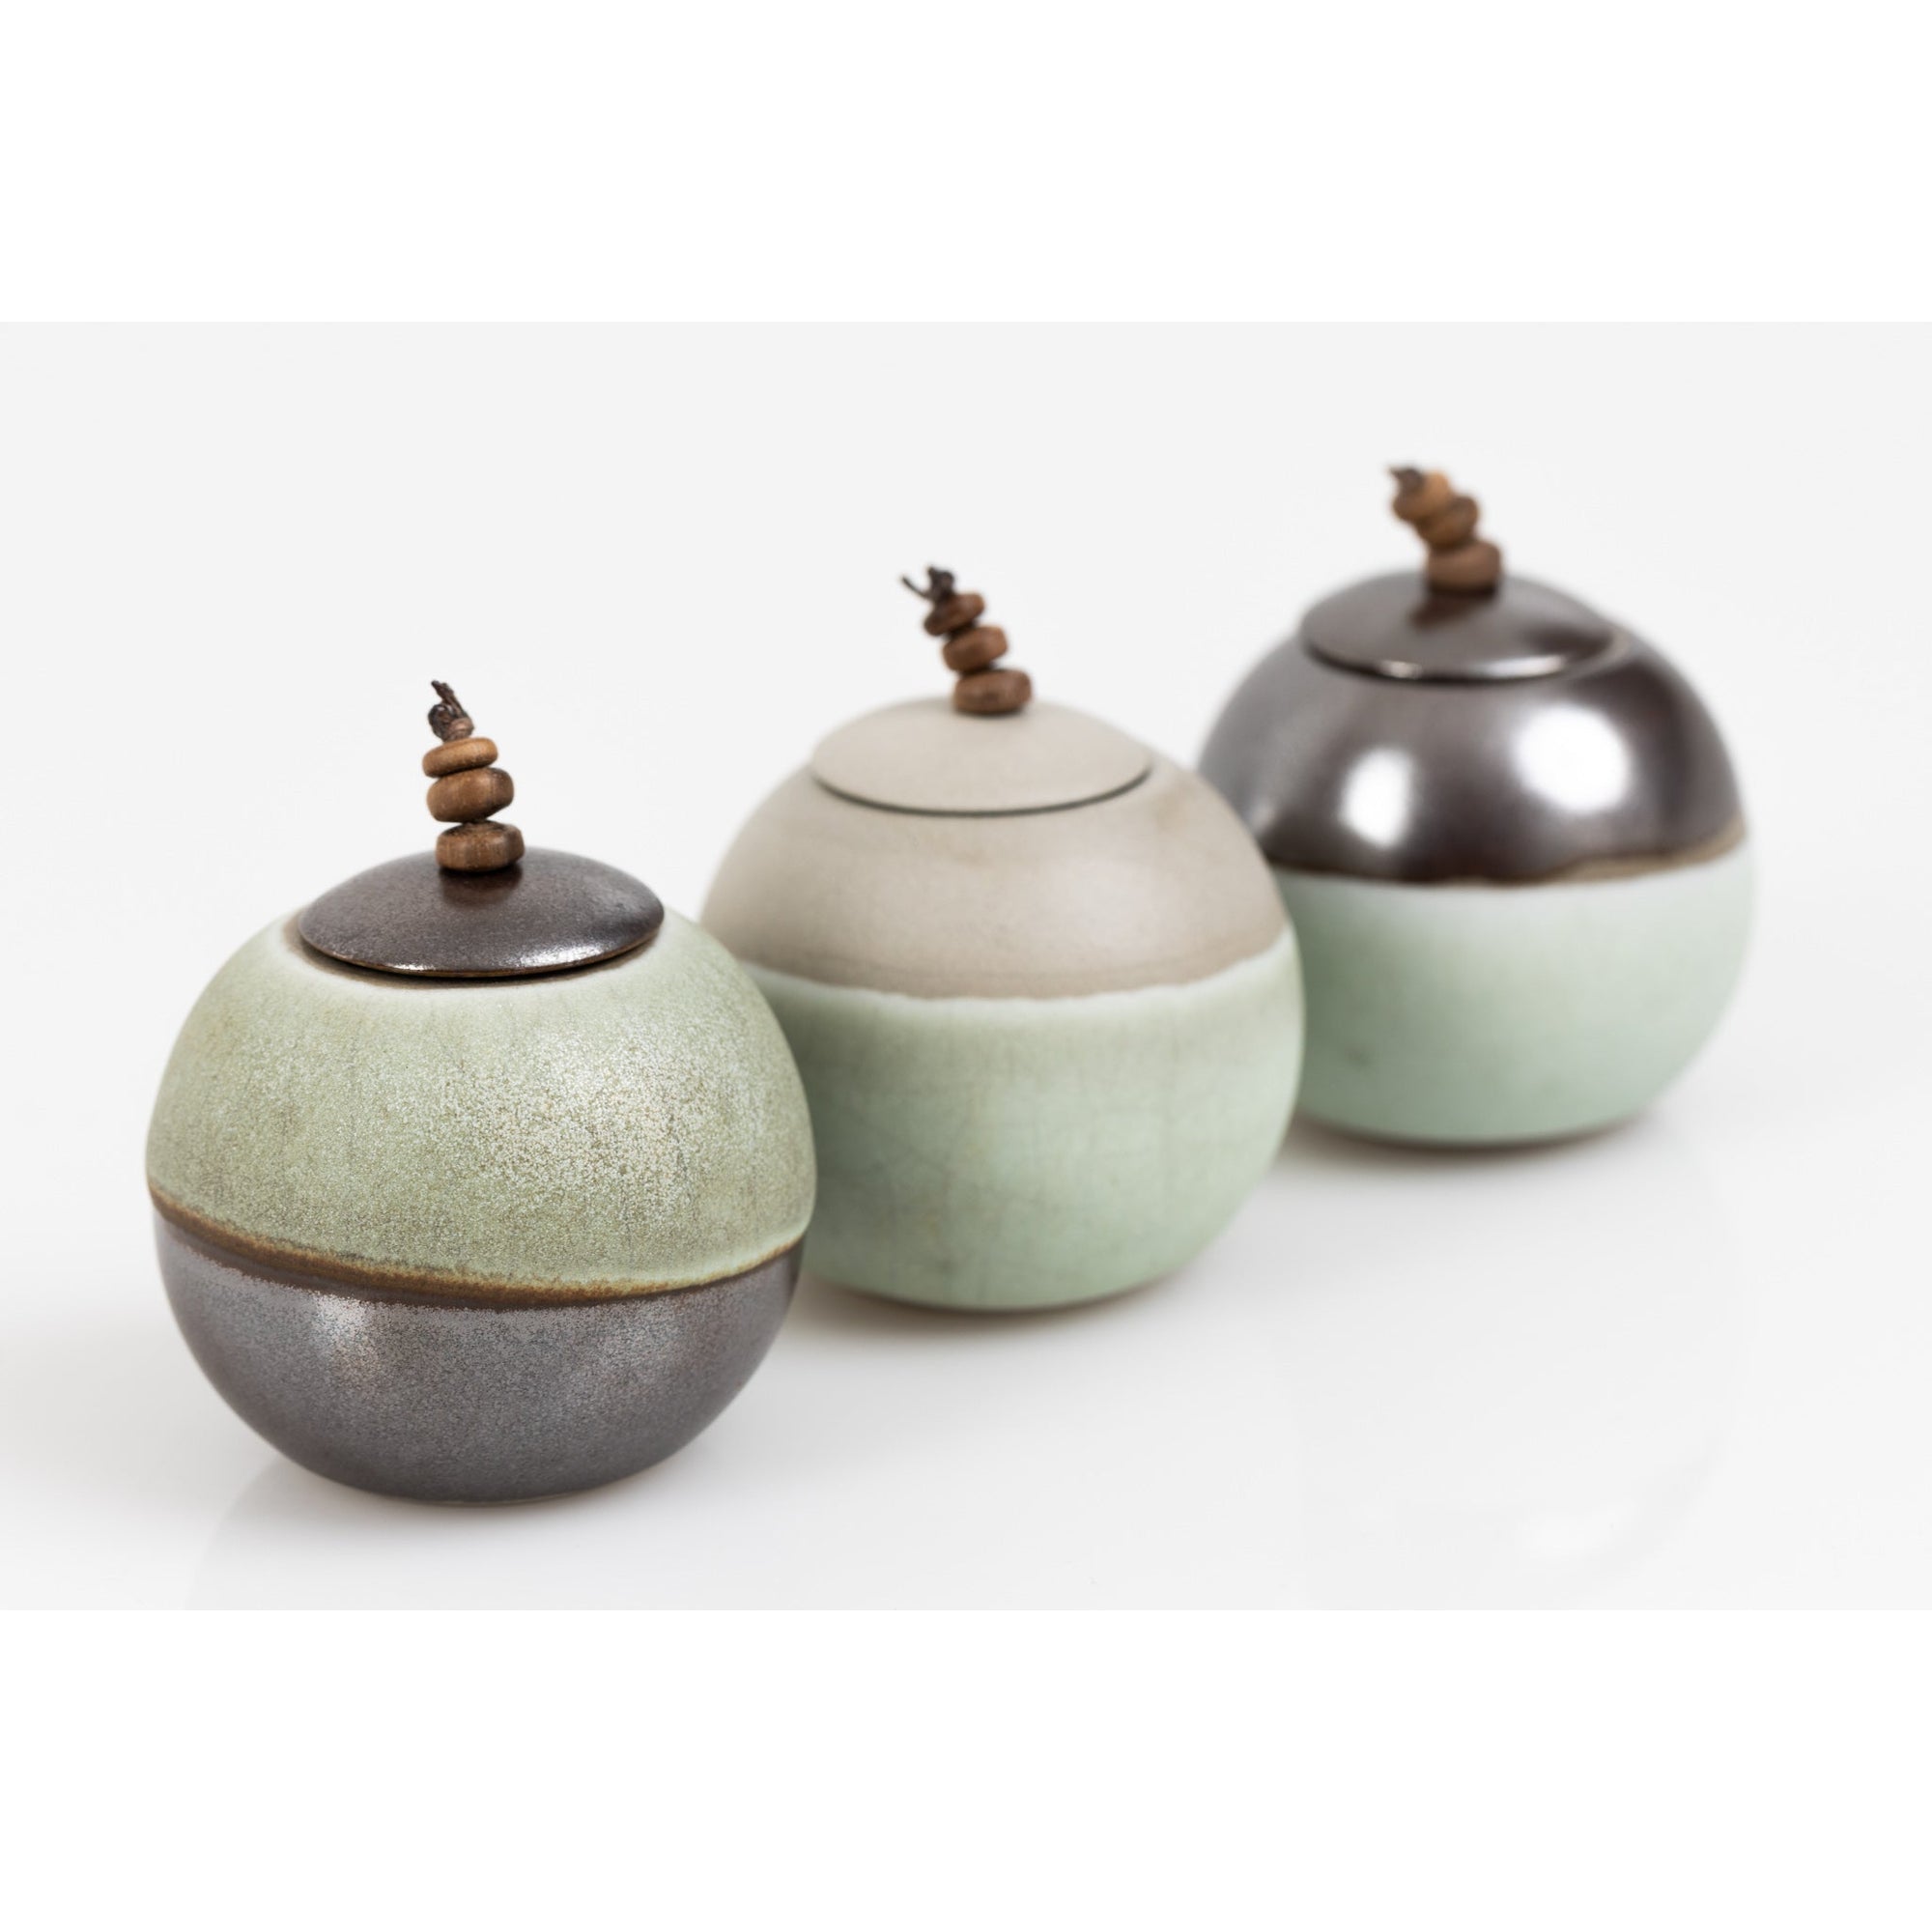 KSH2 Lunar, Stoneware Sphere Pot by Kate Schuricht, available at Padstow Gallery, Cornwall